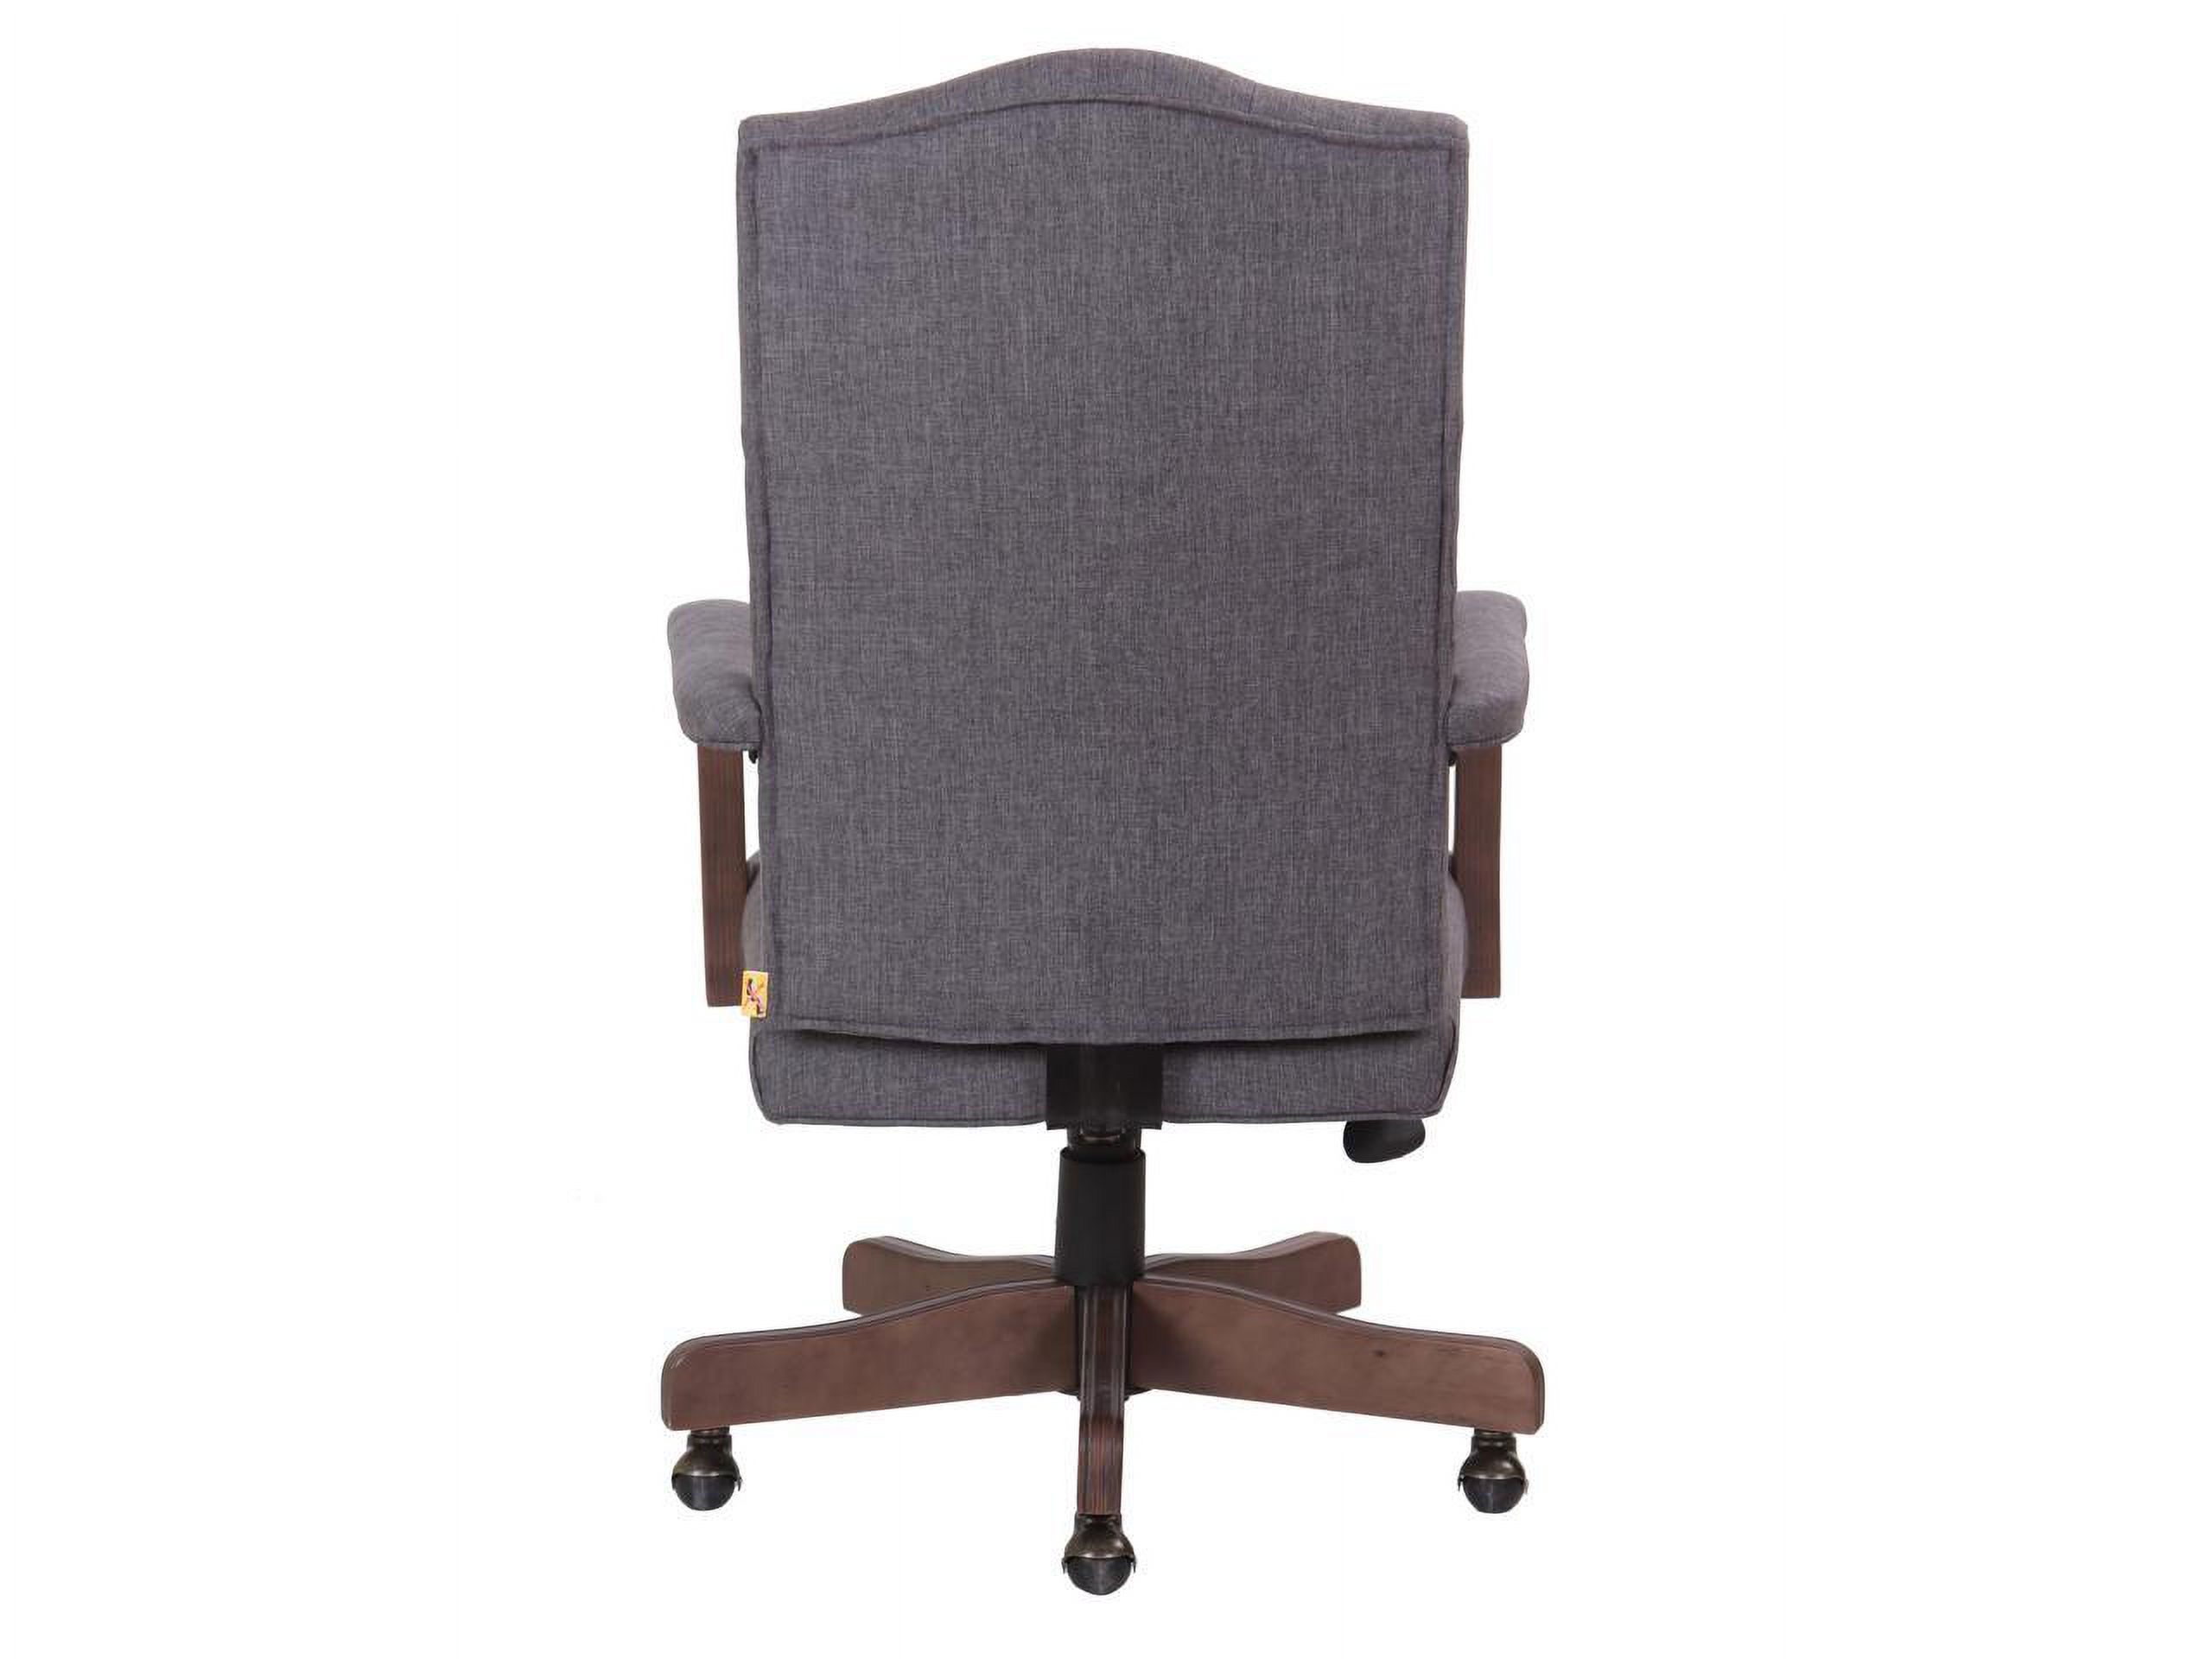 Boss Refined Rustic Executive Chair in Slate Gray Commercial Grade - image 5 of 8